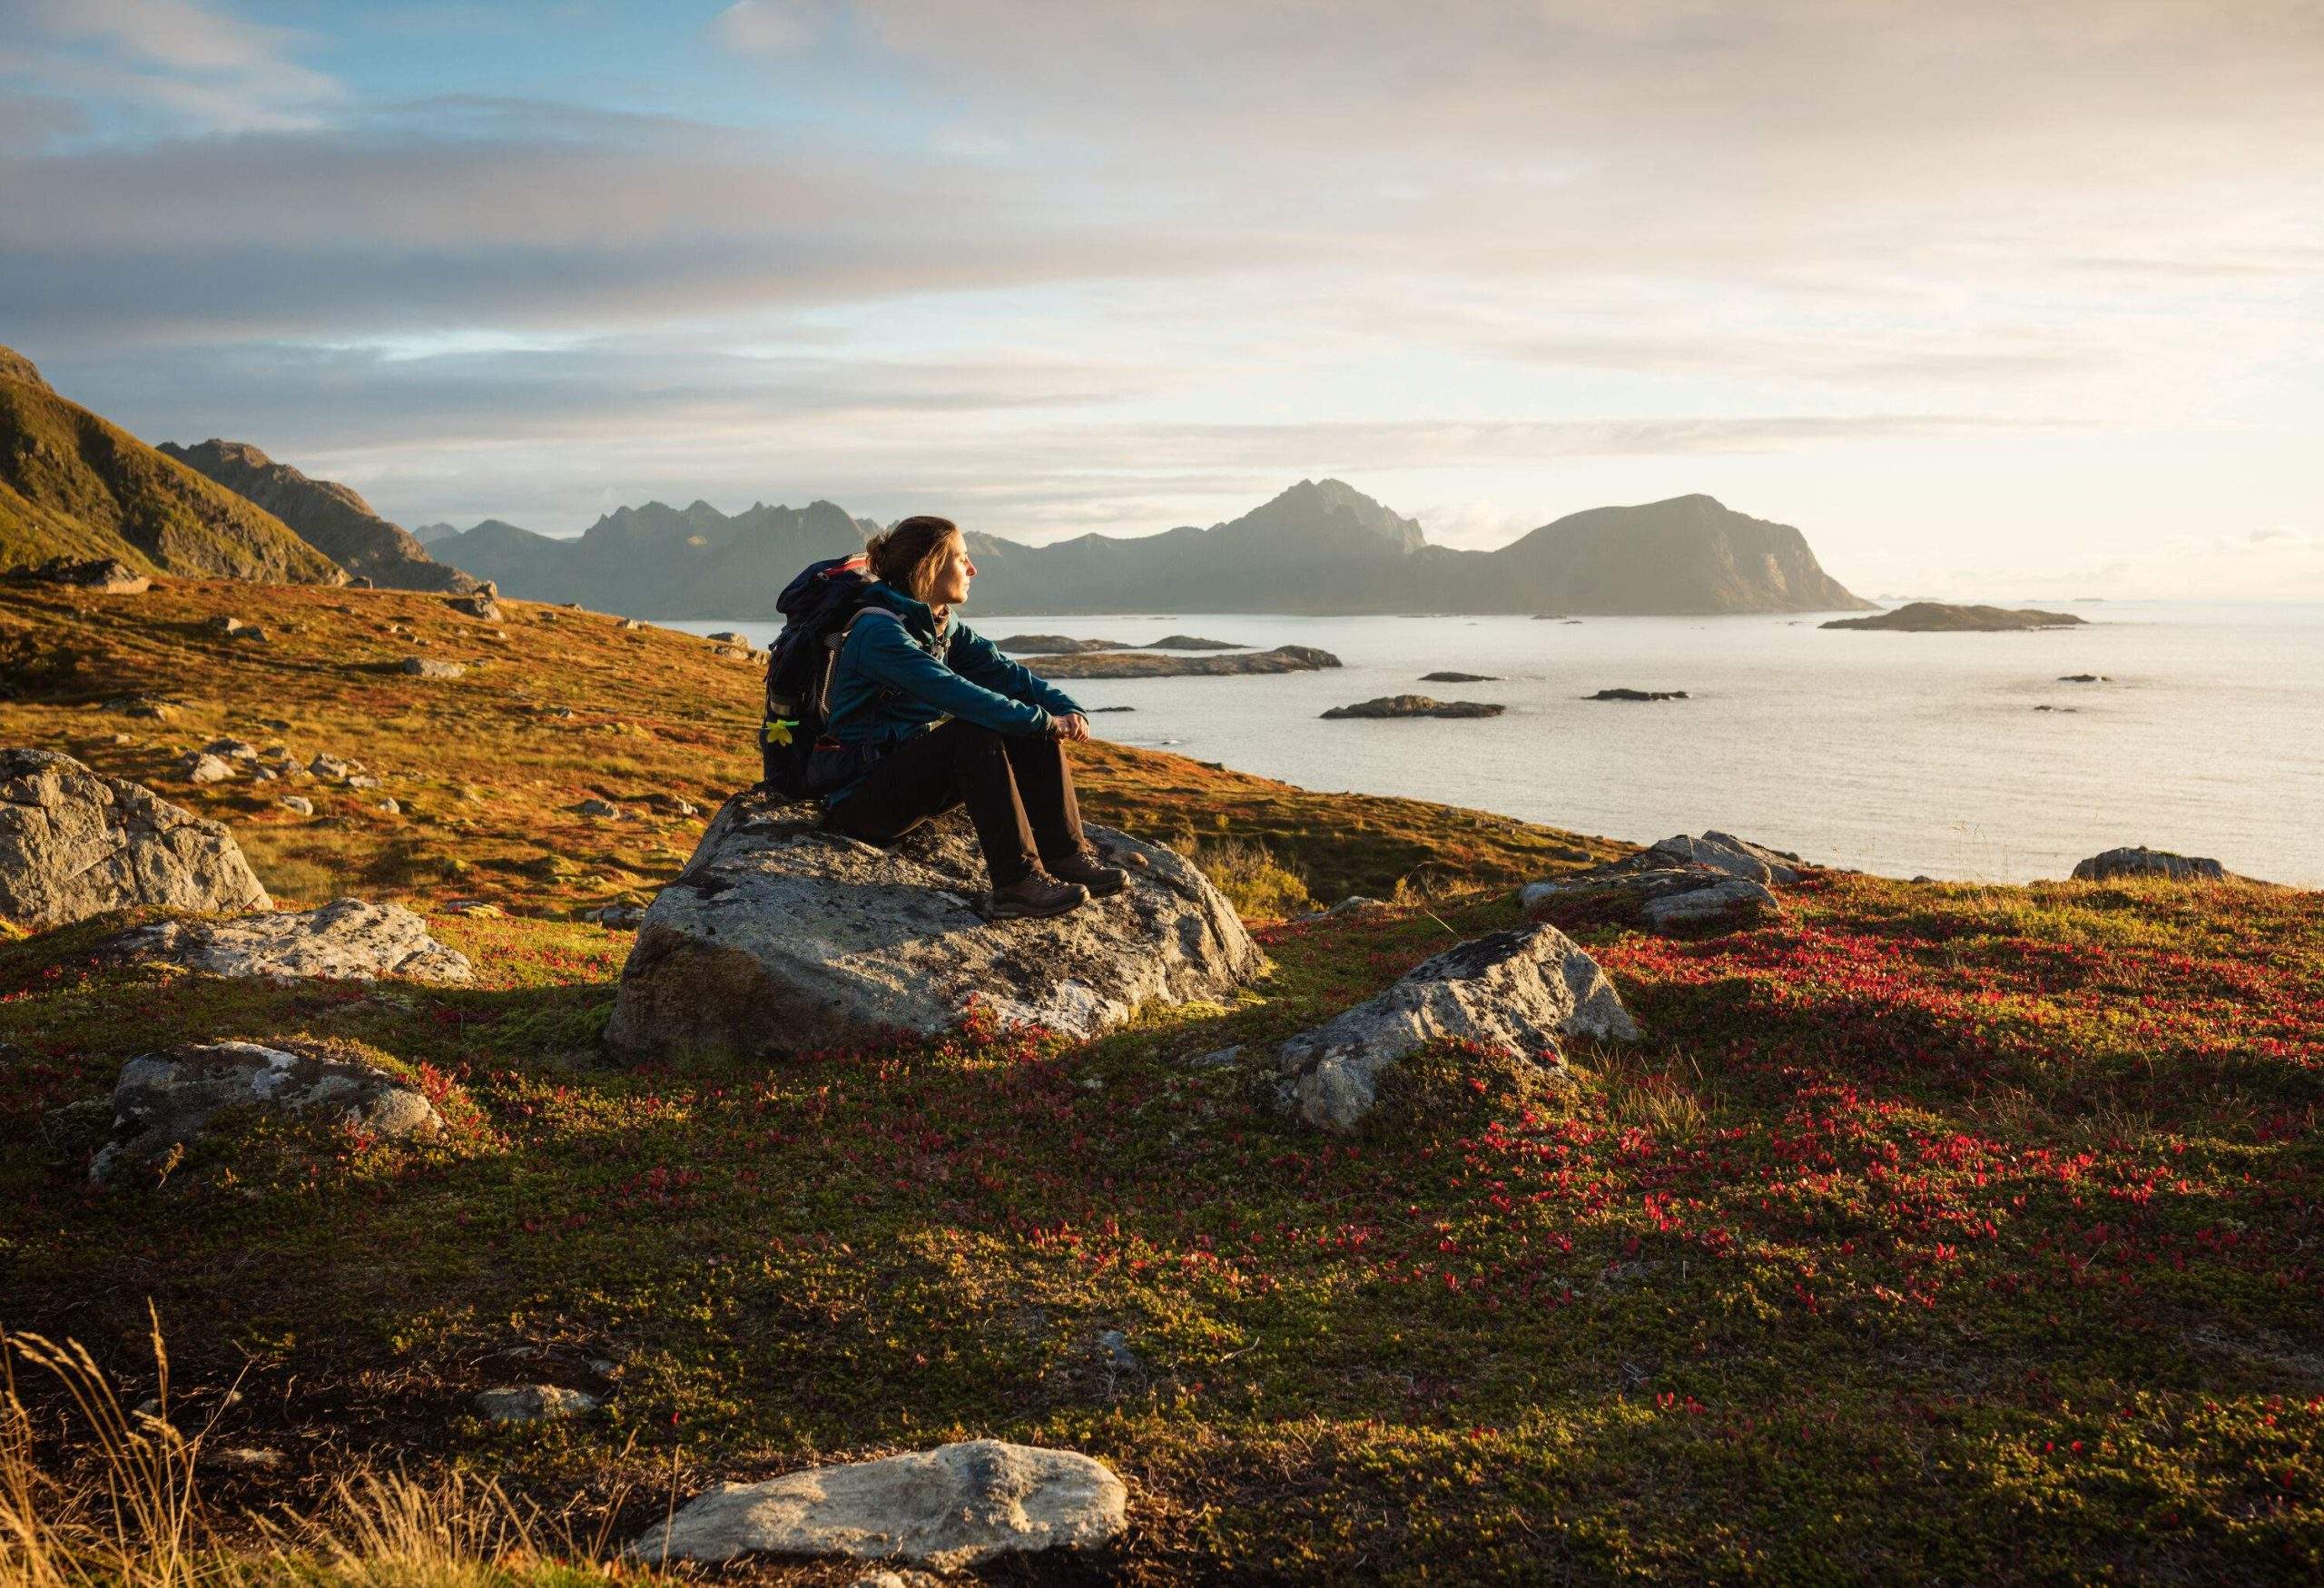 A woman in hiking gear sits on a boulder and gazes at a vast ocean.